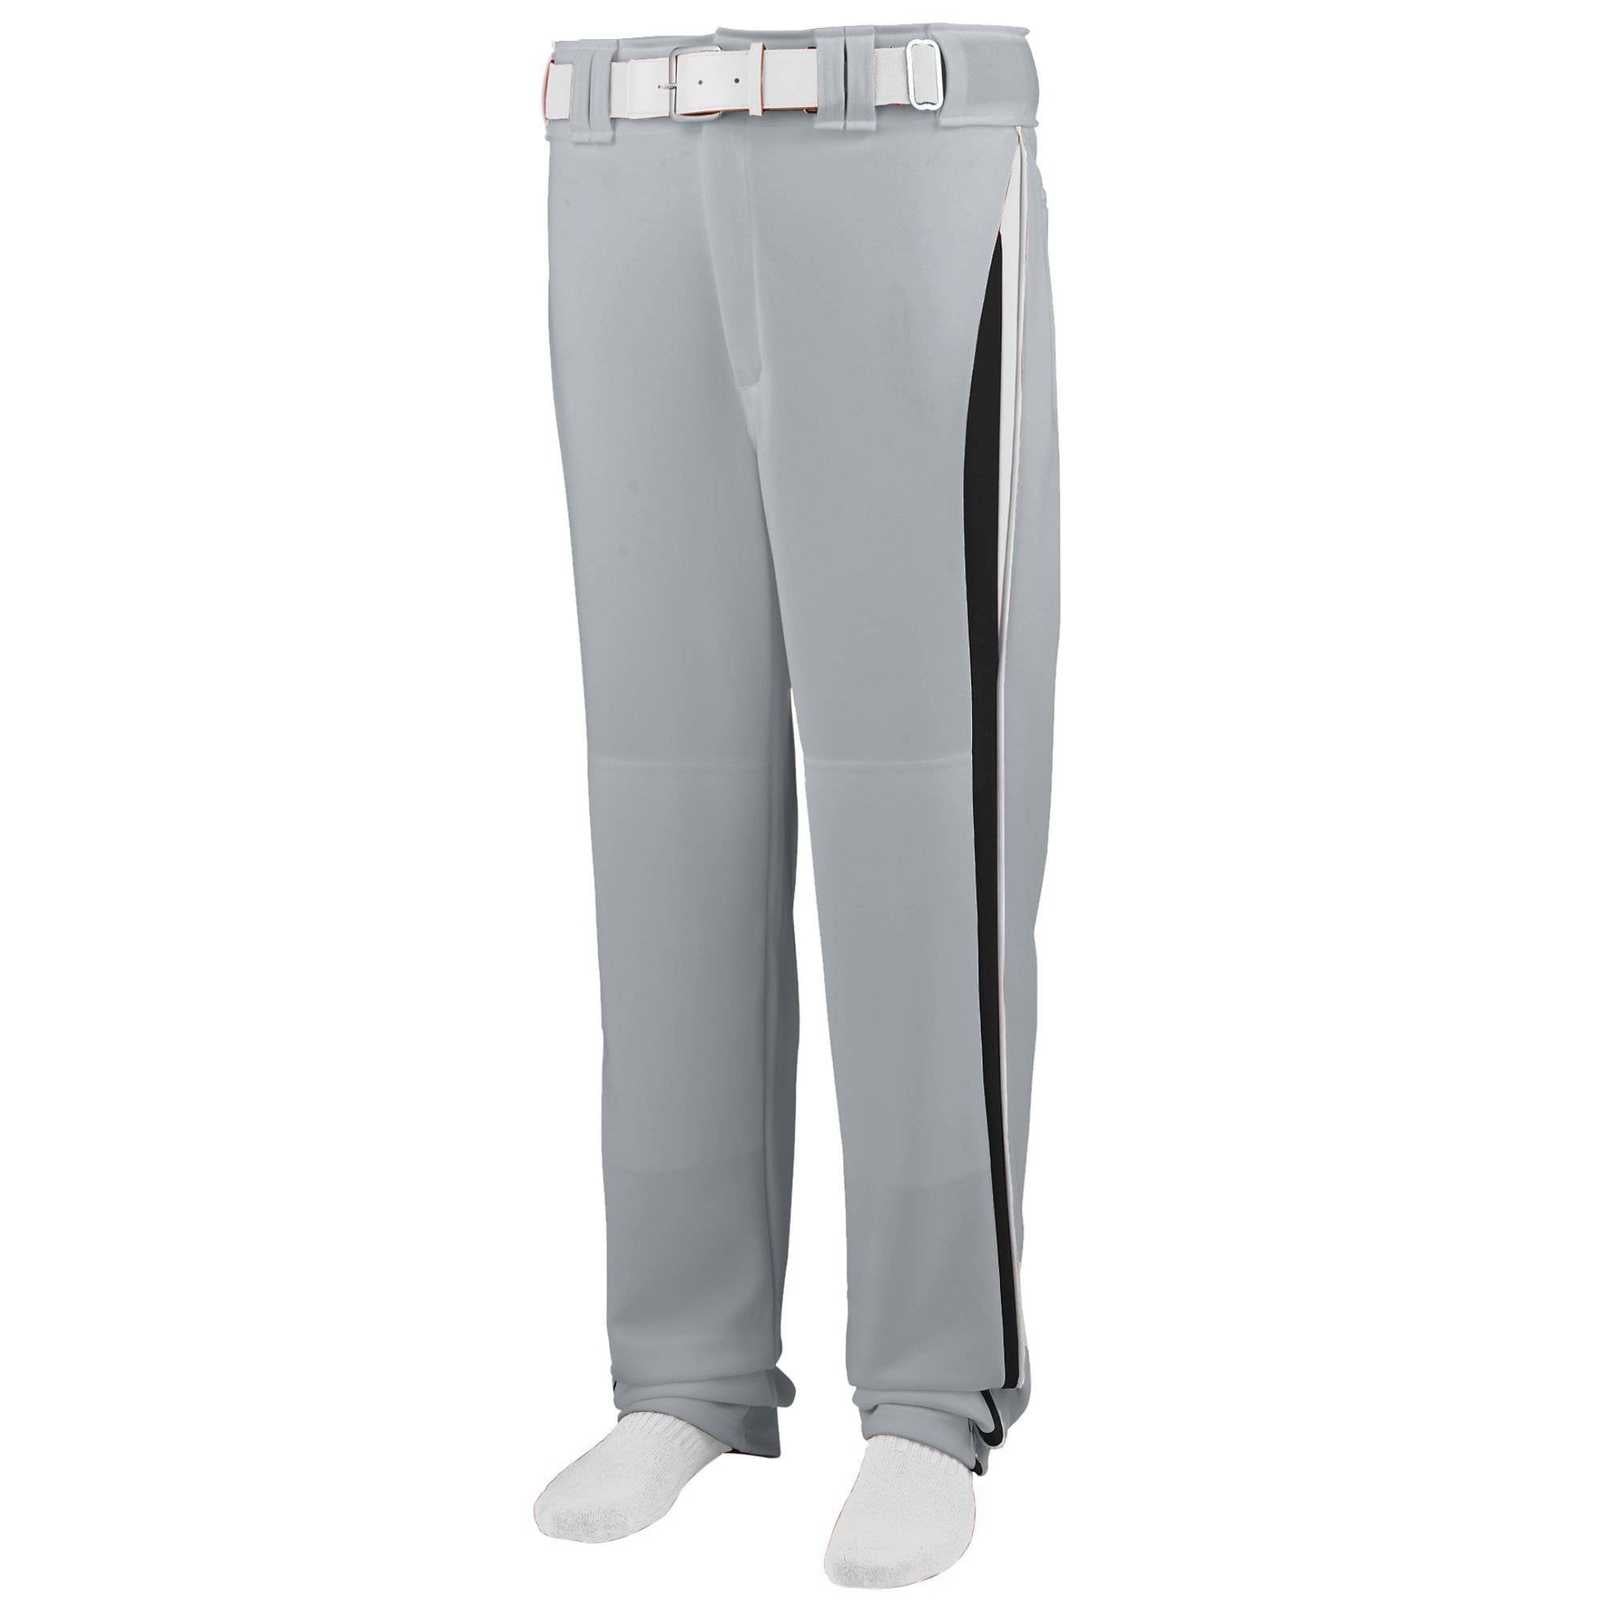 Augusta 1476 Line Drive Baseball Softball Pant Youth - Gy Bk Wh - HIT a Double - 1